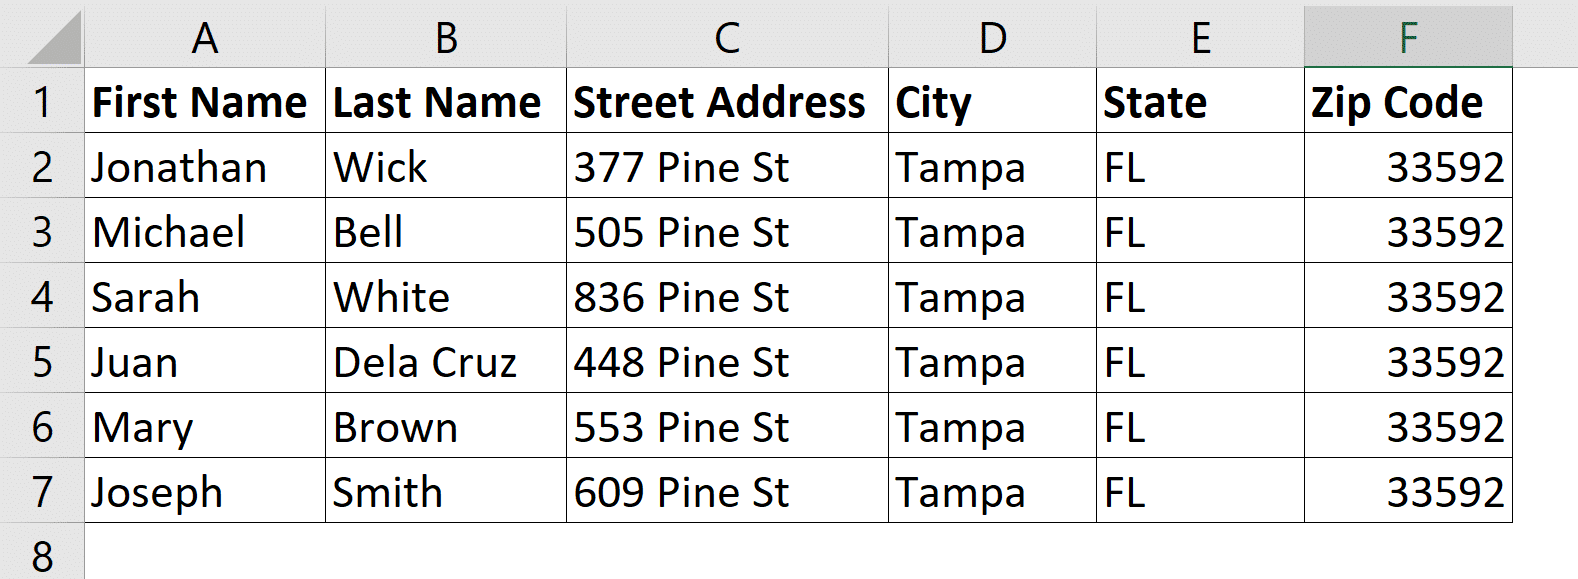 how to print address labels from excel file